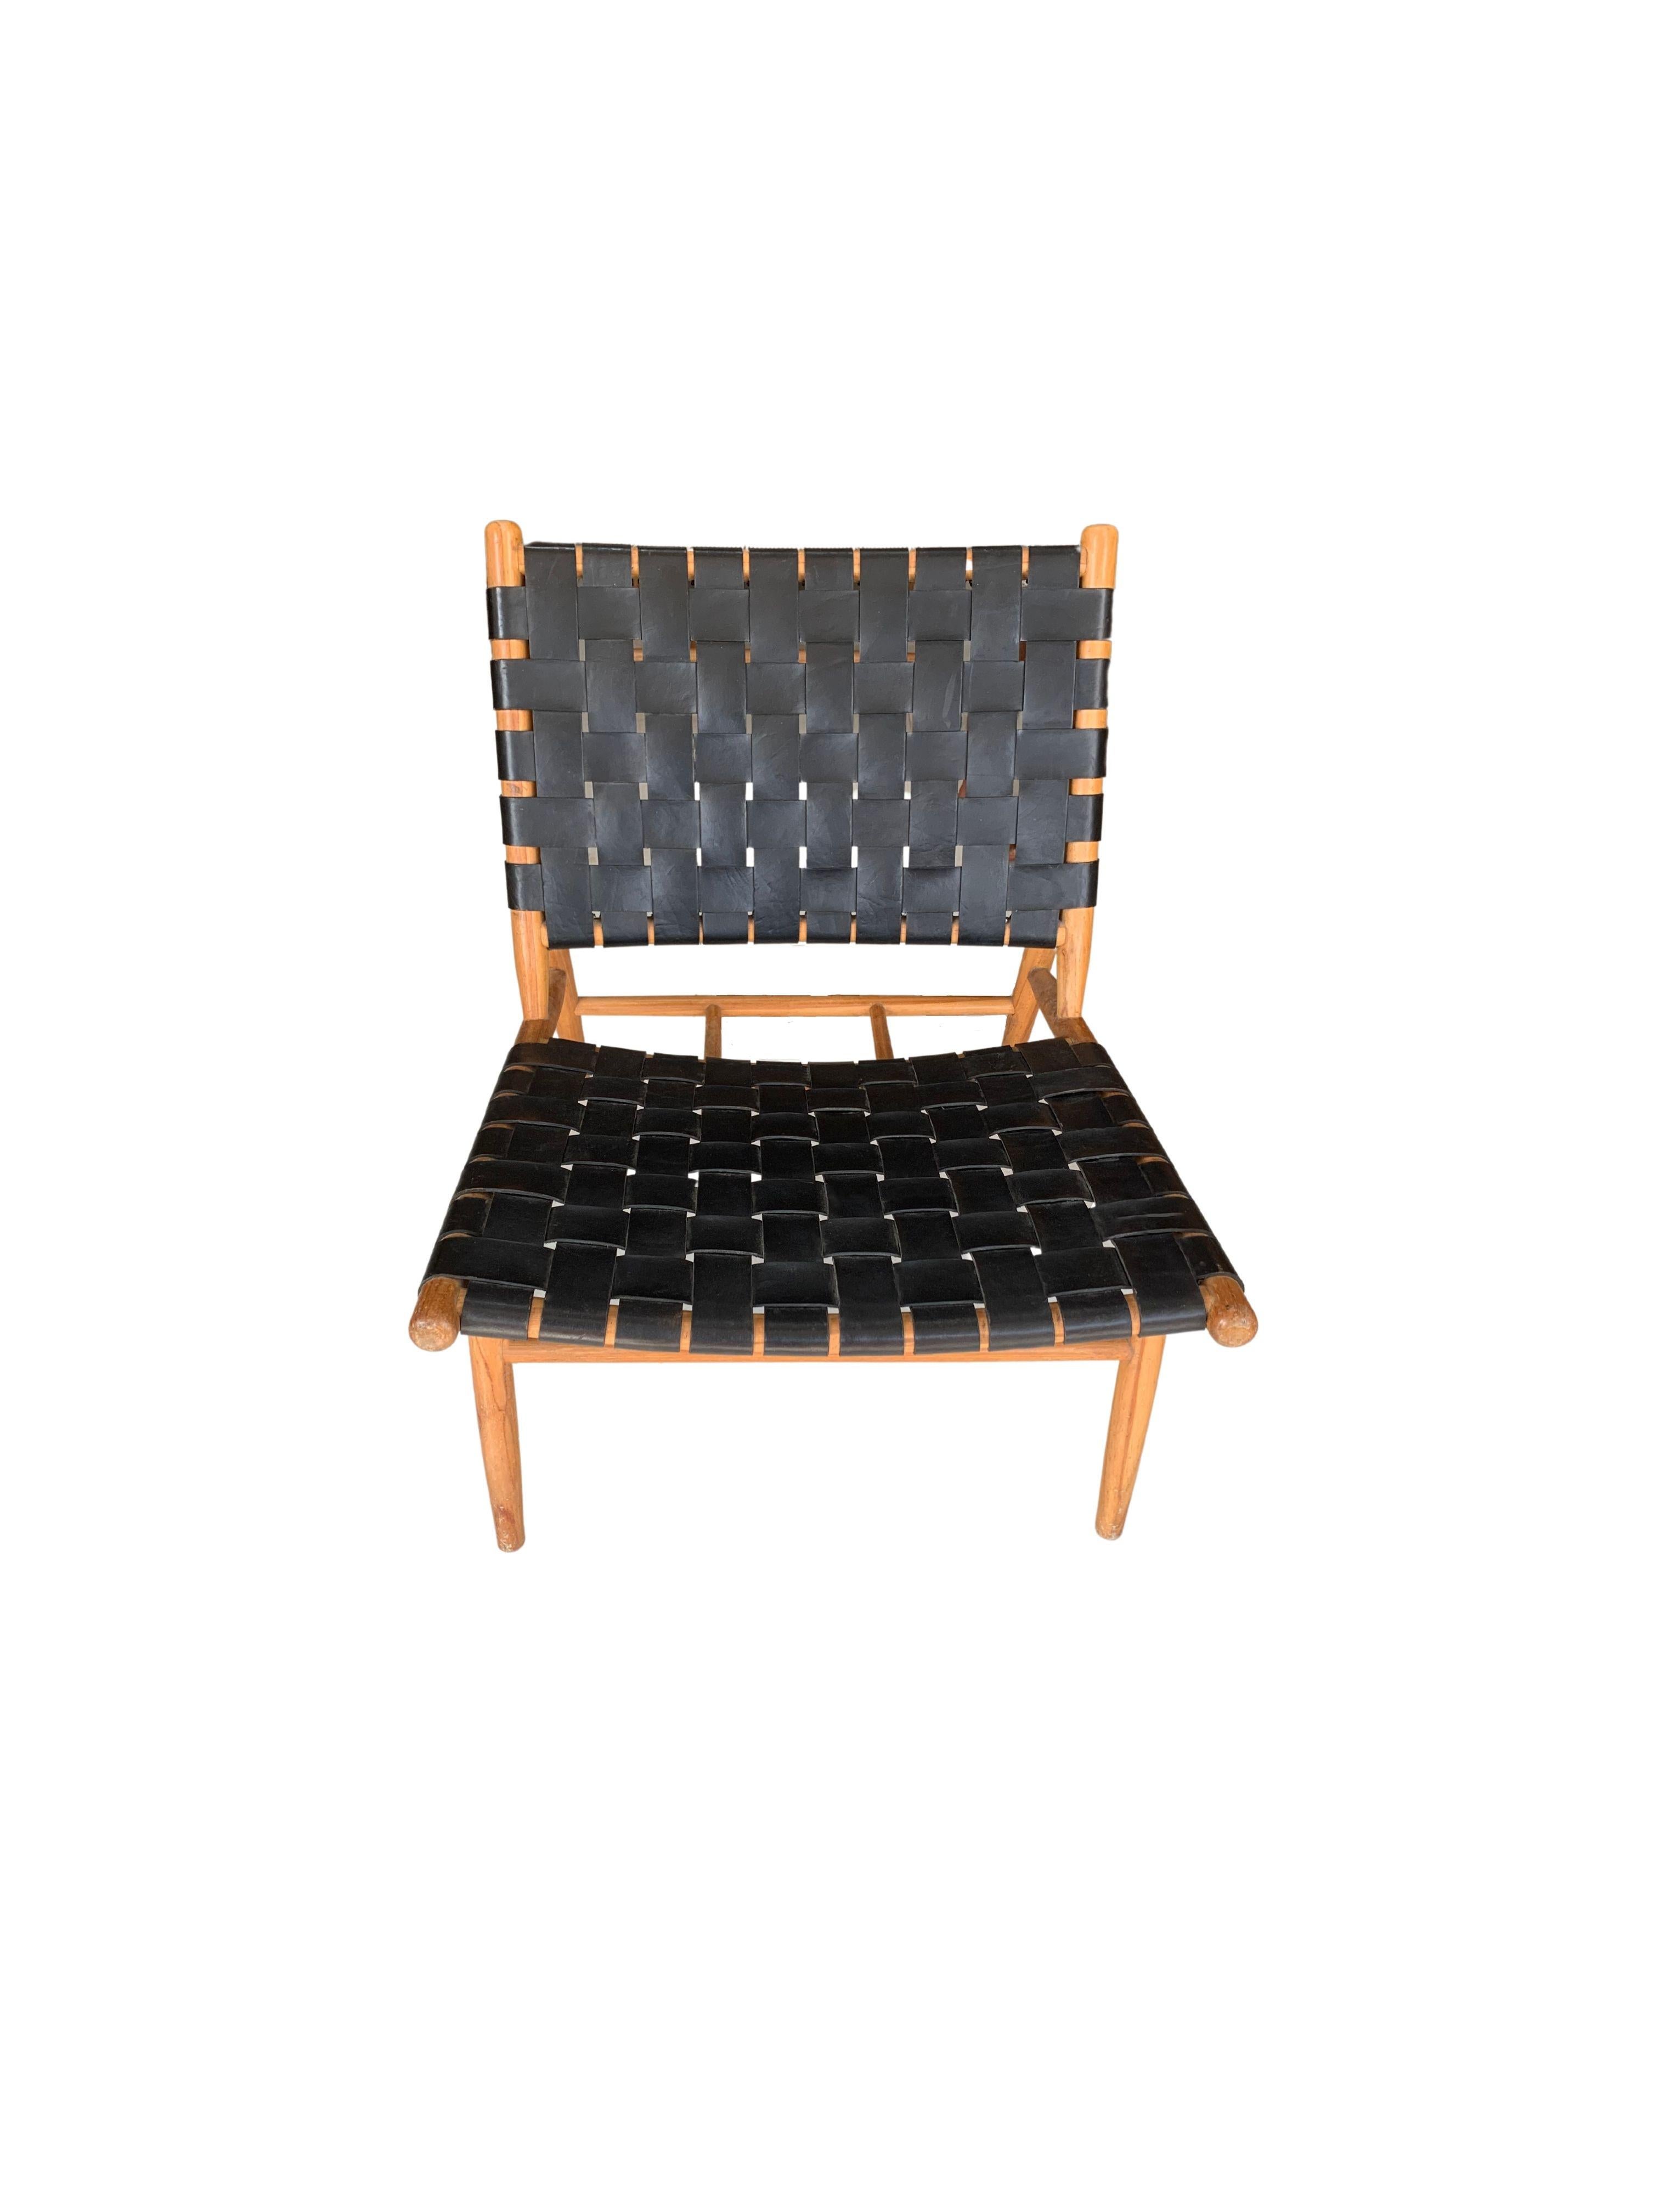 Indonesian Teak Wood Framed Lounge Chair, with Black Woven Leather Seat 